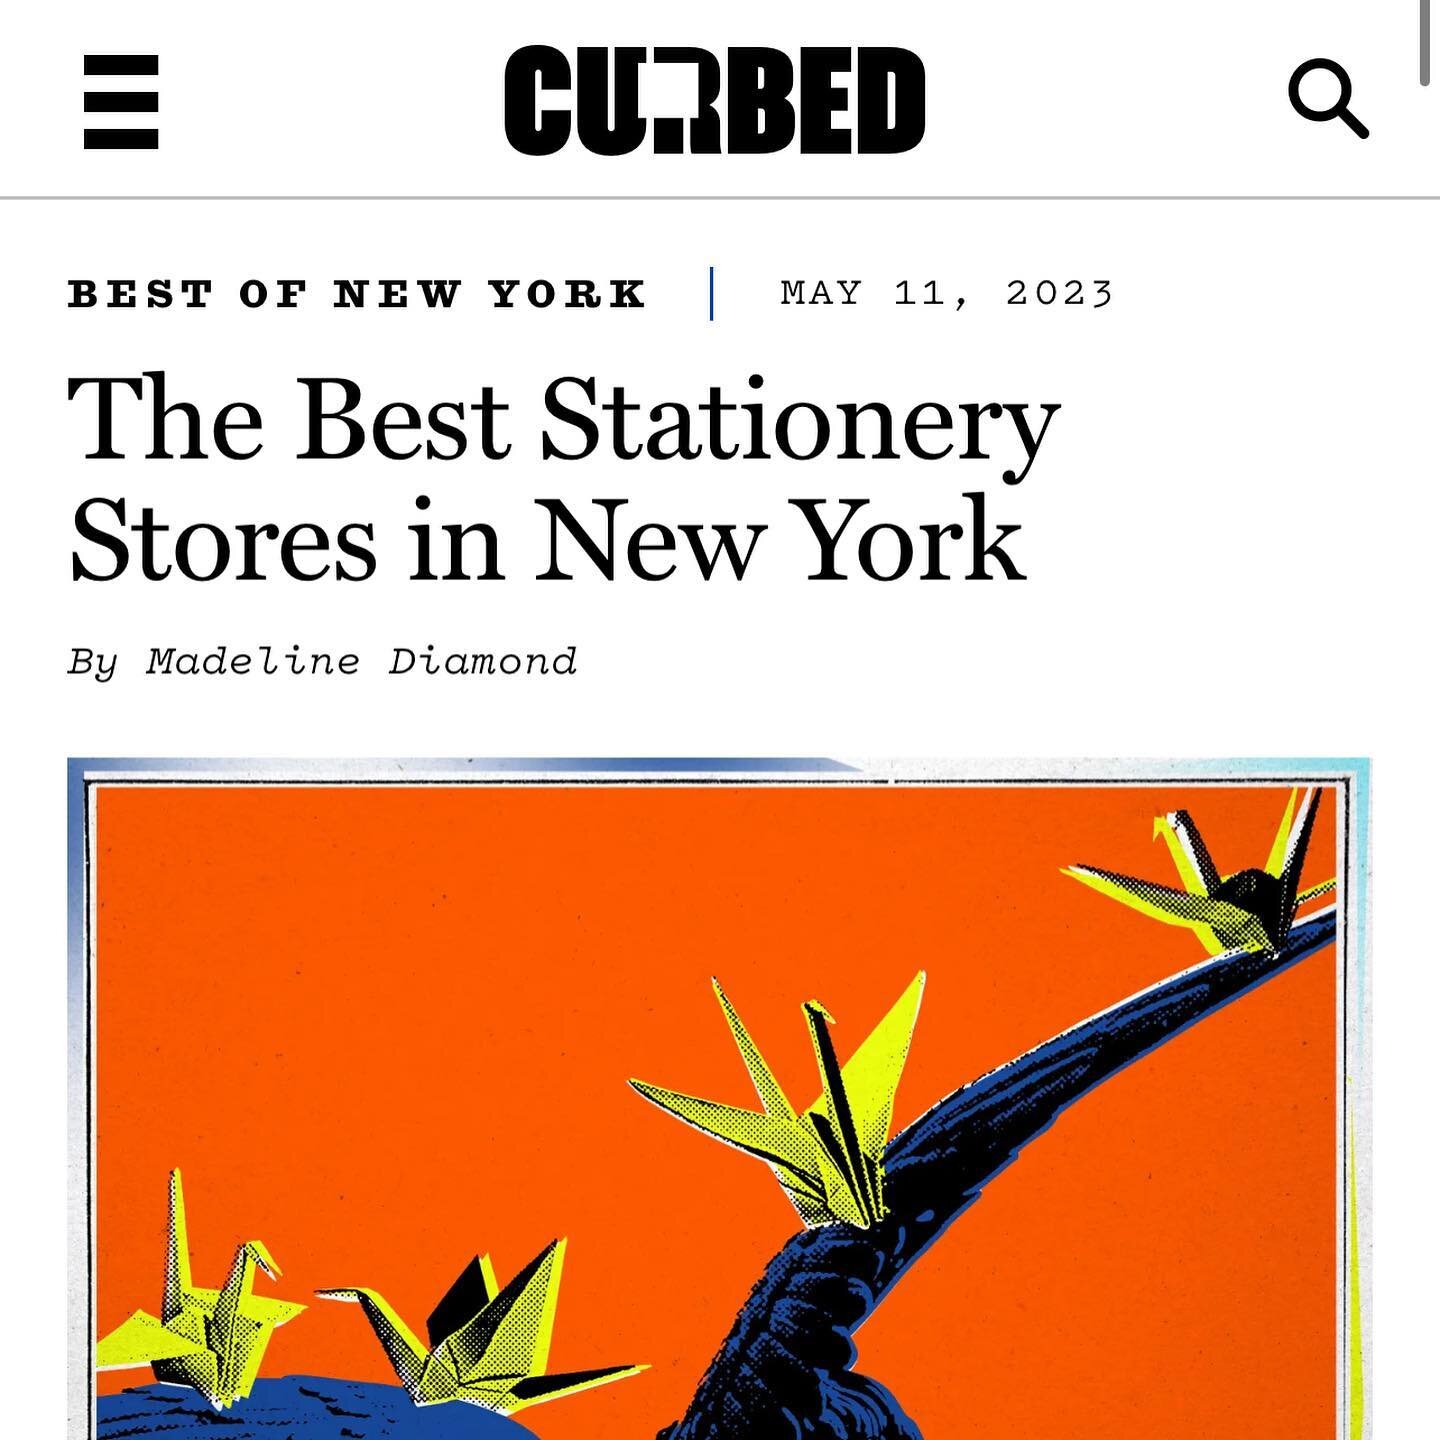 Excited to announce that yours truly is quoted in a NY Magazine article 🗞️ Swipe to see what I had to say about @city_papery or google the entire article!
.
Also featured is my calligrafriend @ranishasingh_
.
.
.
.
.
.
.
.
#nymagazine #curbed #curbe